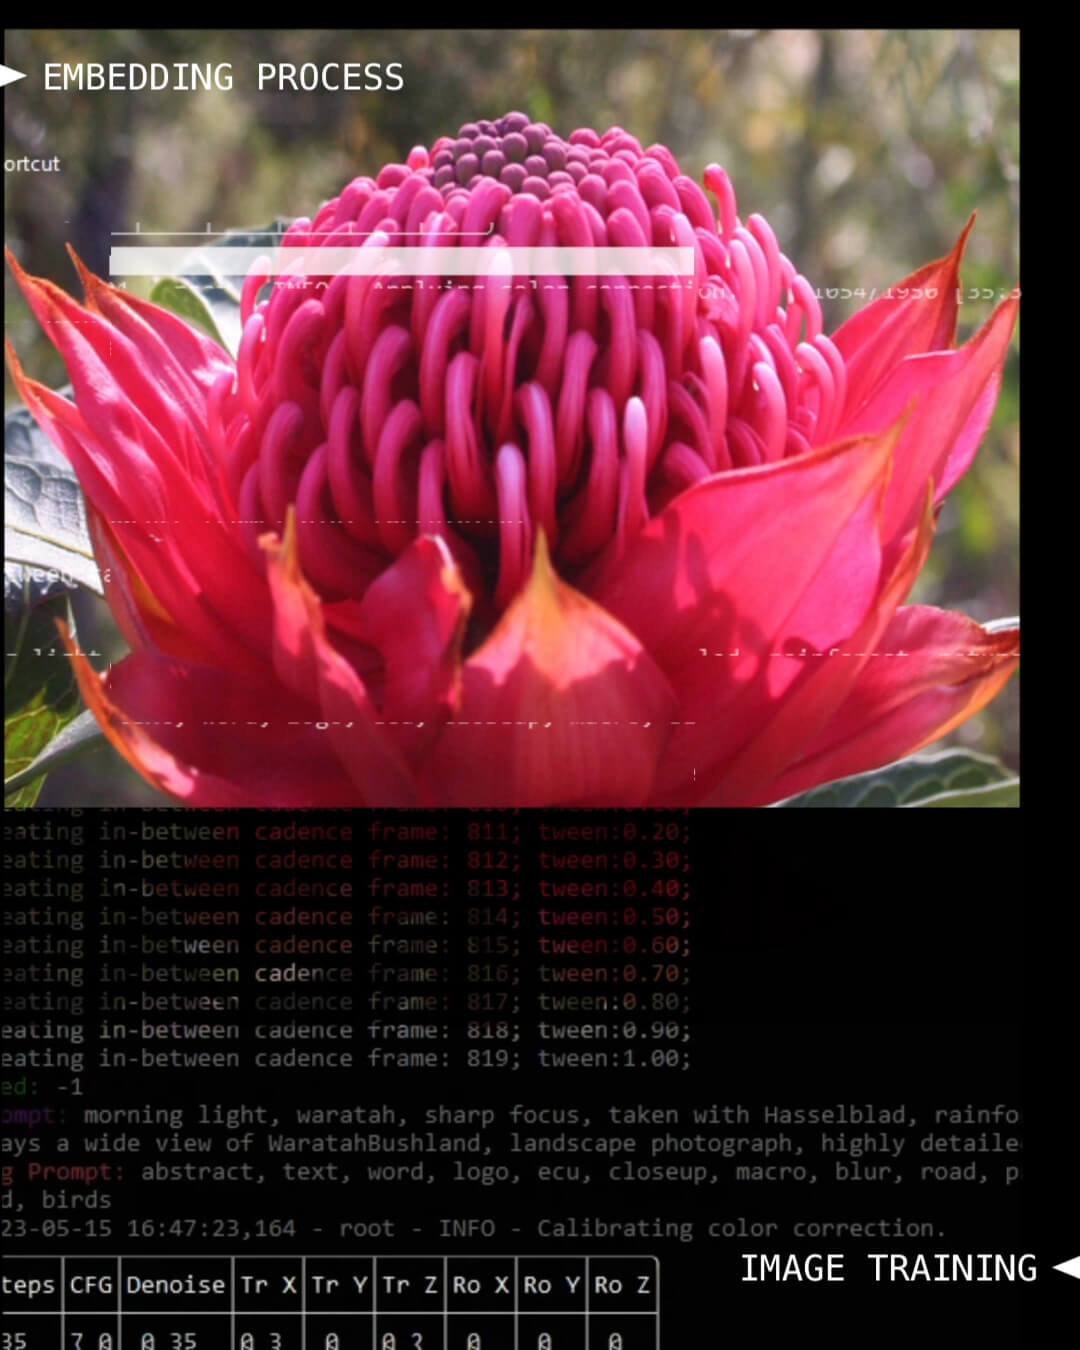 Waratah flower generated using generative AI in Stable Diffusion.